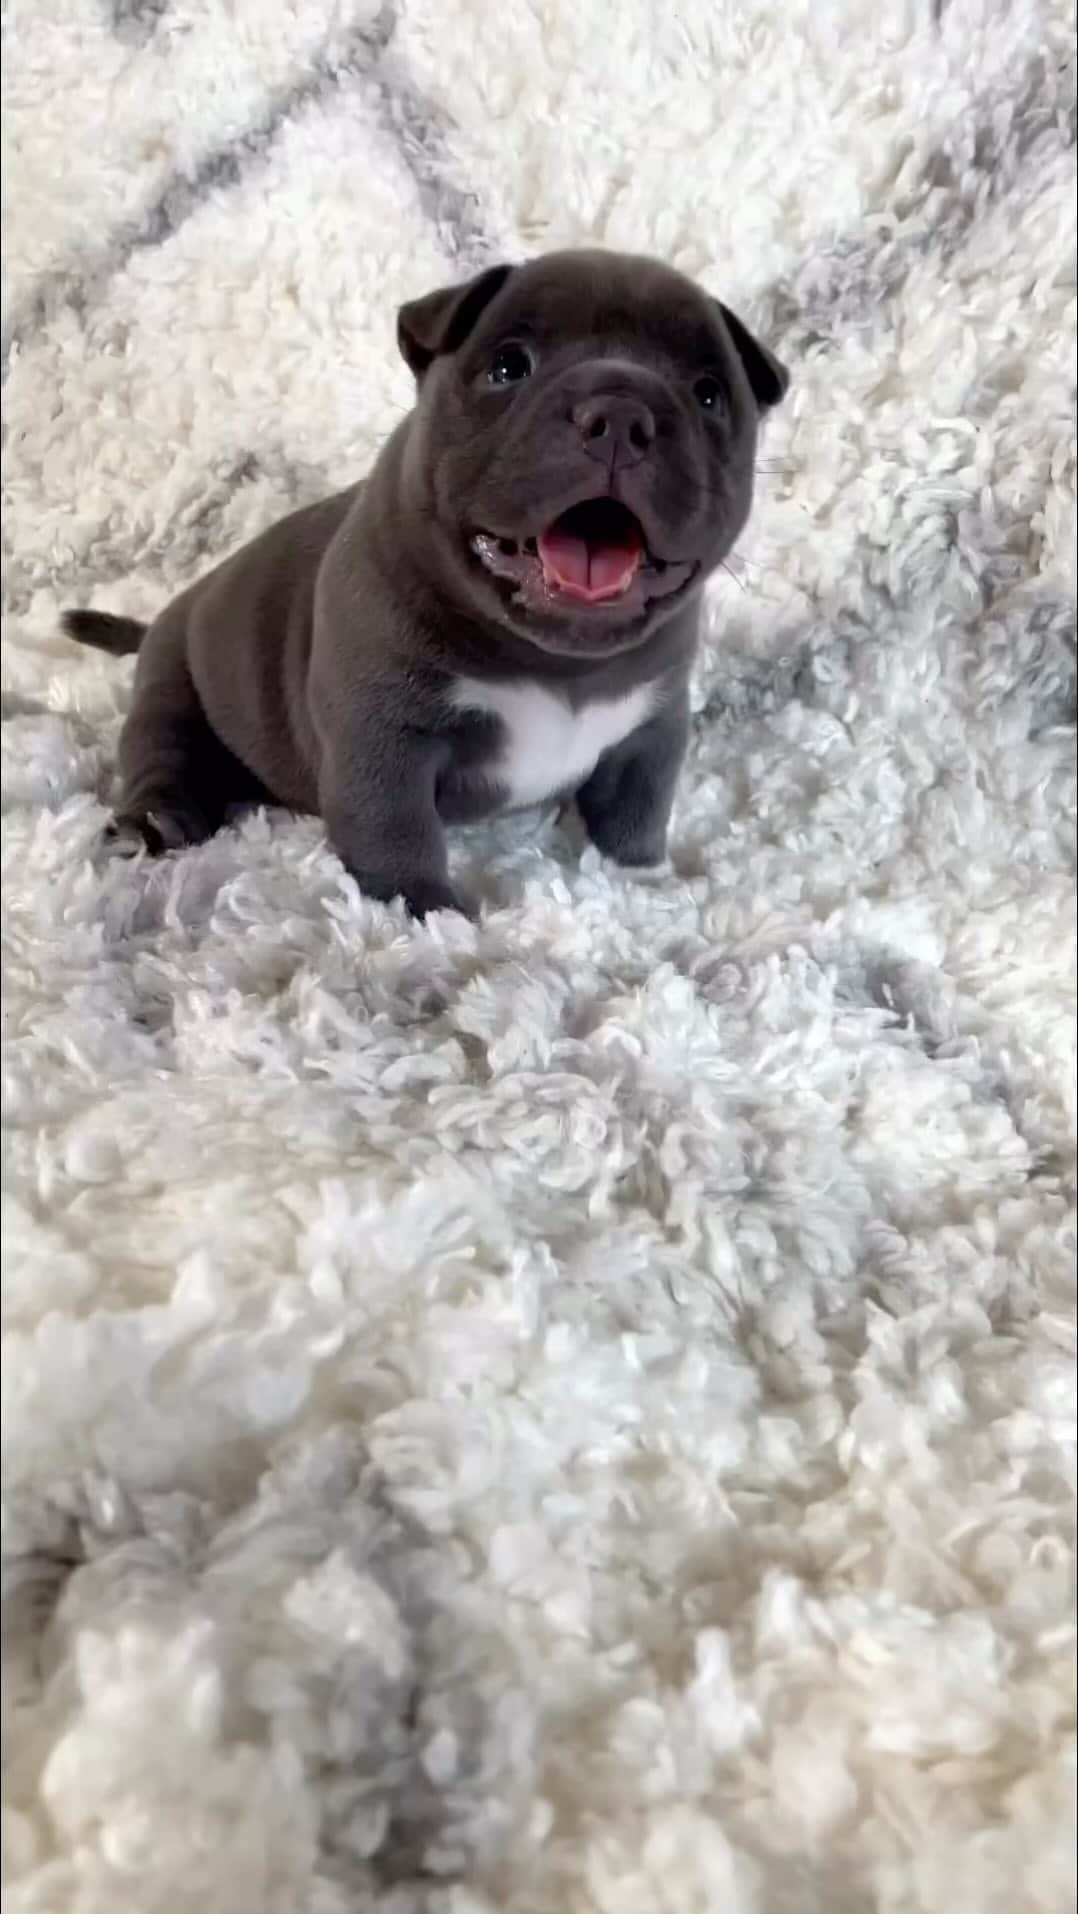 Cute baby animal videos picsのインスタグラム：「Aww 🥹❤️ Song : BLUE @skars  - - Follow us @cutie.animals.page and @puppy_lovings for more !! 💙 - - Credit 📸 @mosonbullycampbackup DM for removal)🙏🏻 - - #animals #nature #animal #pets #love #cute #wildlife #pet #cats #dog #photography #dogs #instagram #cat #naturephotography #of #photooftheday #dogsofinstagram #animallovers #wildlifephotography #petsofinstagram #birds #catsofinstagram #instagood #petstagram #art #animalsofinstagram #puppy #bird #bhfyp」